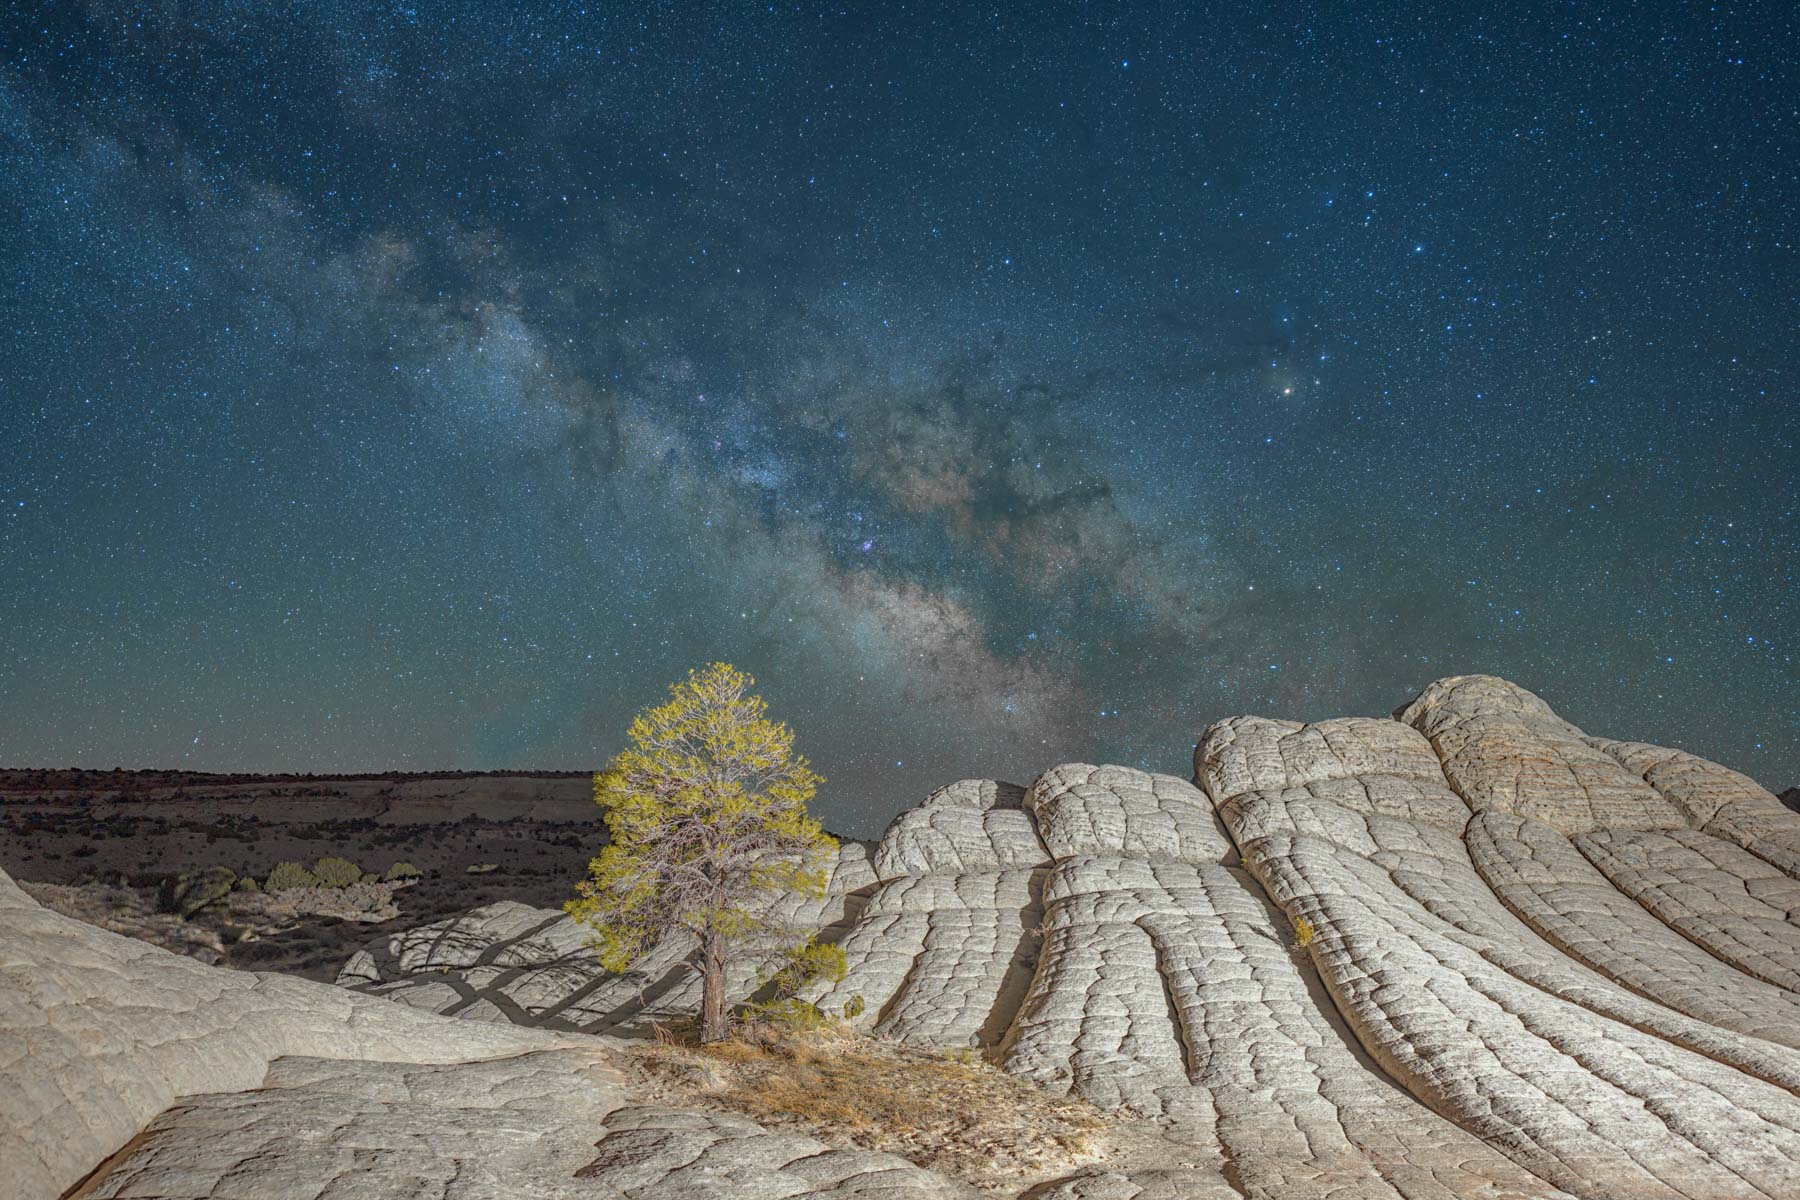 The Milky Way over a Ponderosa Pine  at The White Pocket in Vermilion Cliffs National Monument